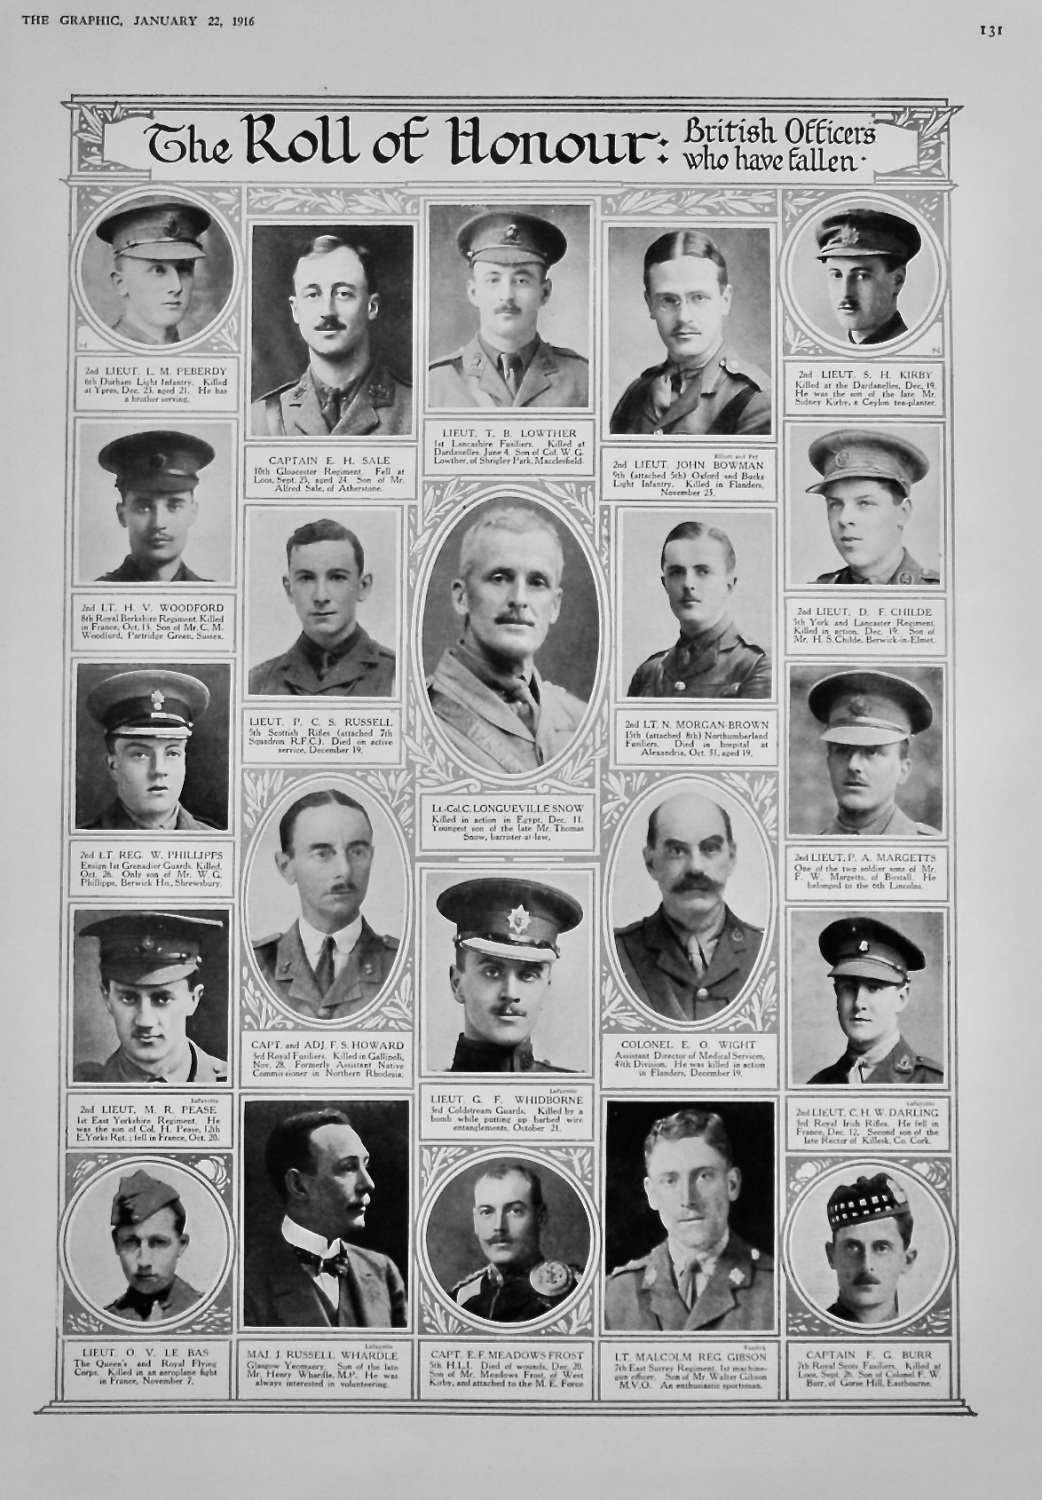 The Roll of Honour, January 22nd, 1916.